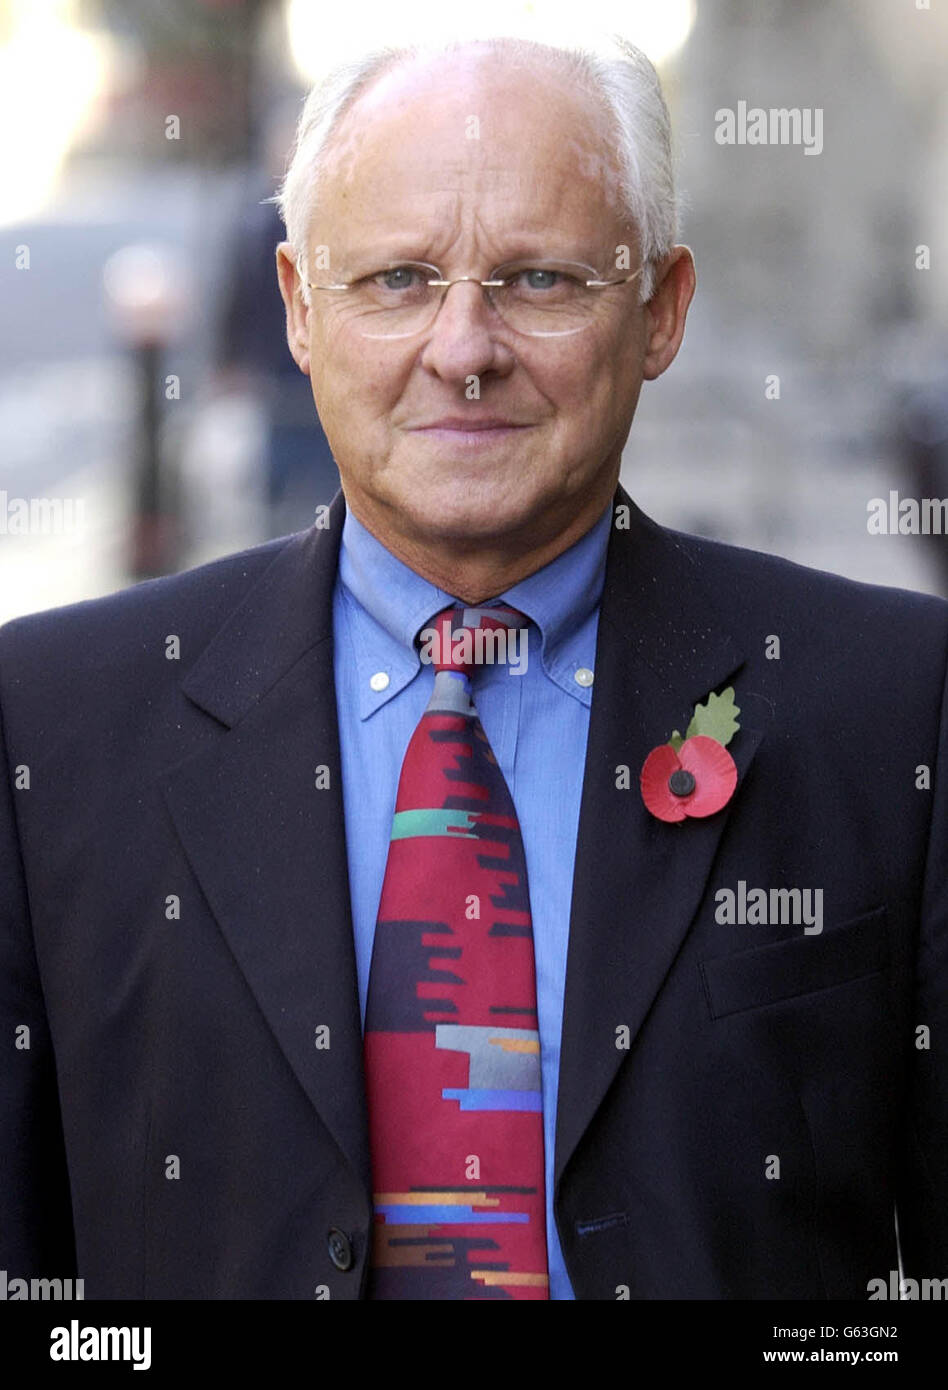 Dickie Arbiter, a former press officer at Buckingham Palace, arrives at the Old Bailey, London, where he was expected to give evidence in the trial of Paul Burrell, the former butler to the Princess of Wales, who faces three charges of theft. * after police discovered more than 300 items belonging to the late princess and her family. Stock Photo